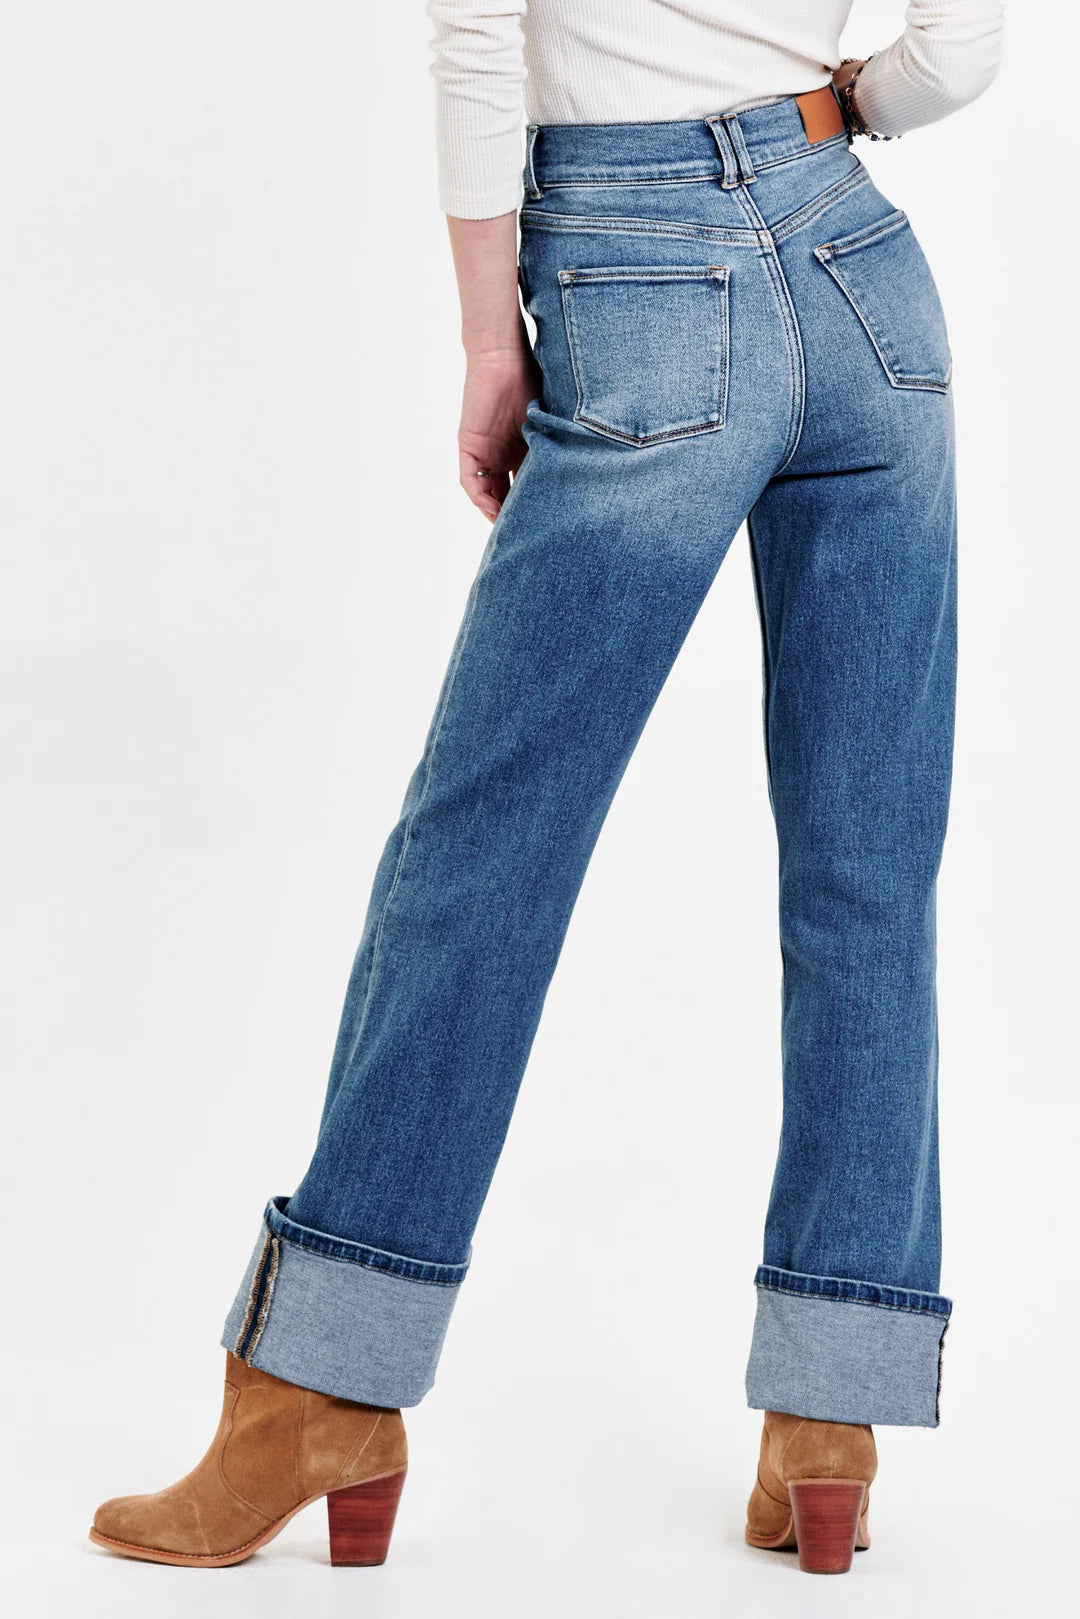 Dear John HOLLY SUPER HIGH RISE CUFFED STRAIGHT JEANS JUSTICE